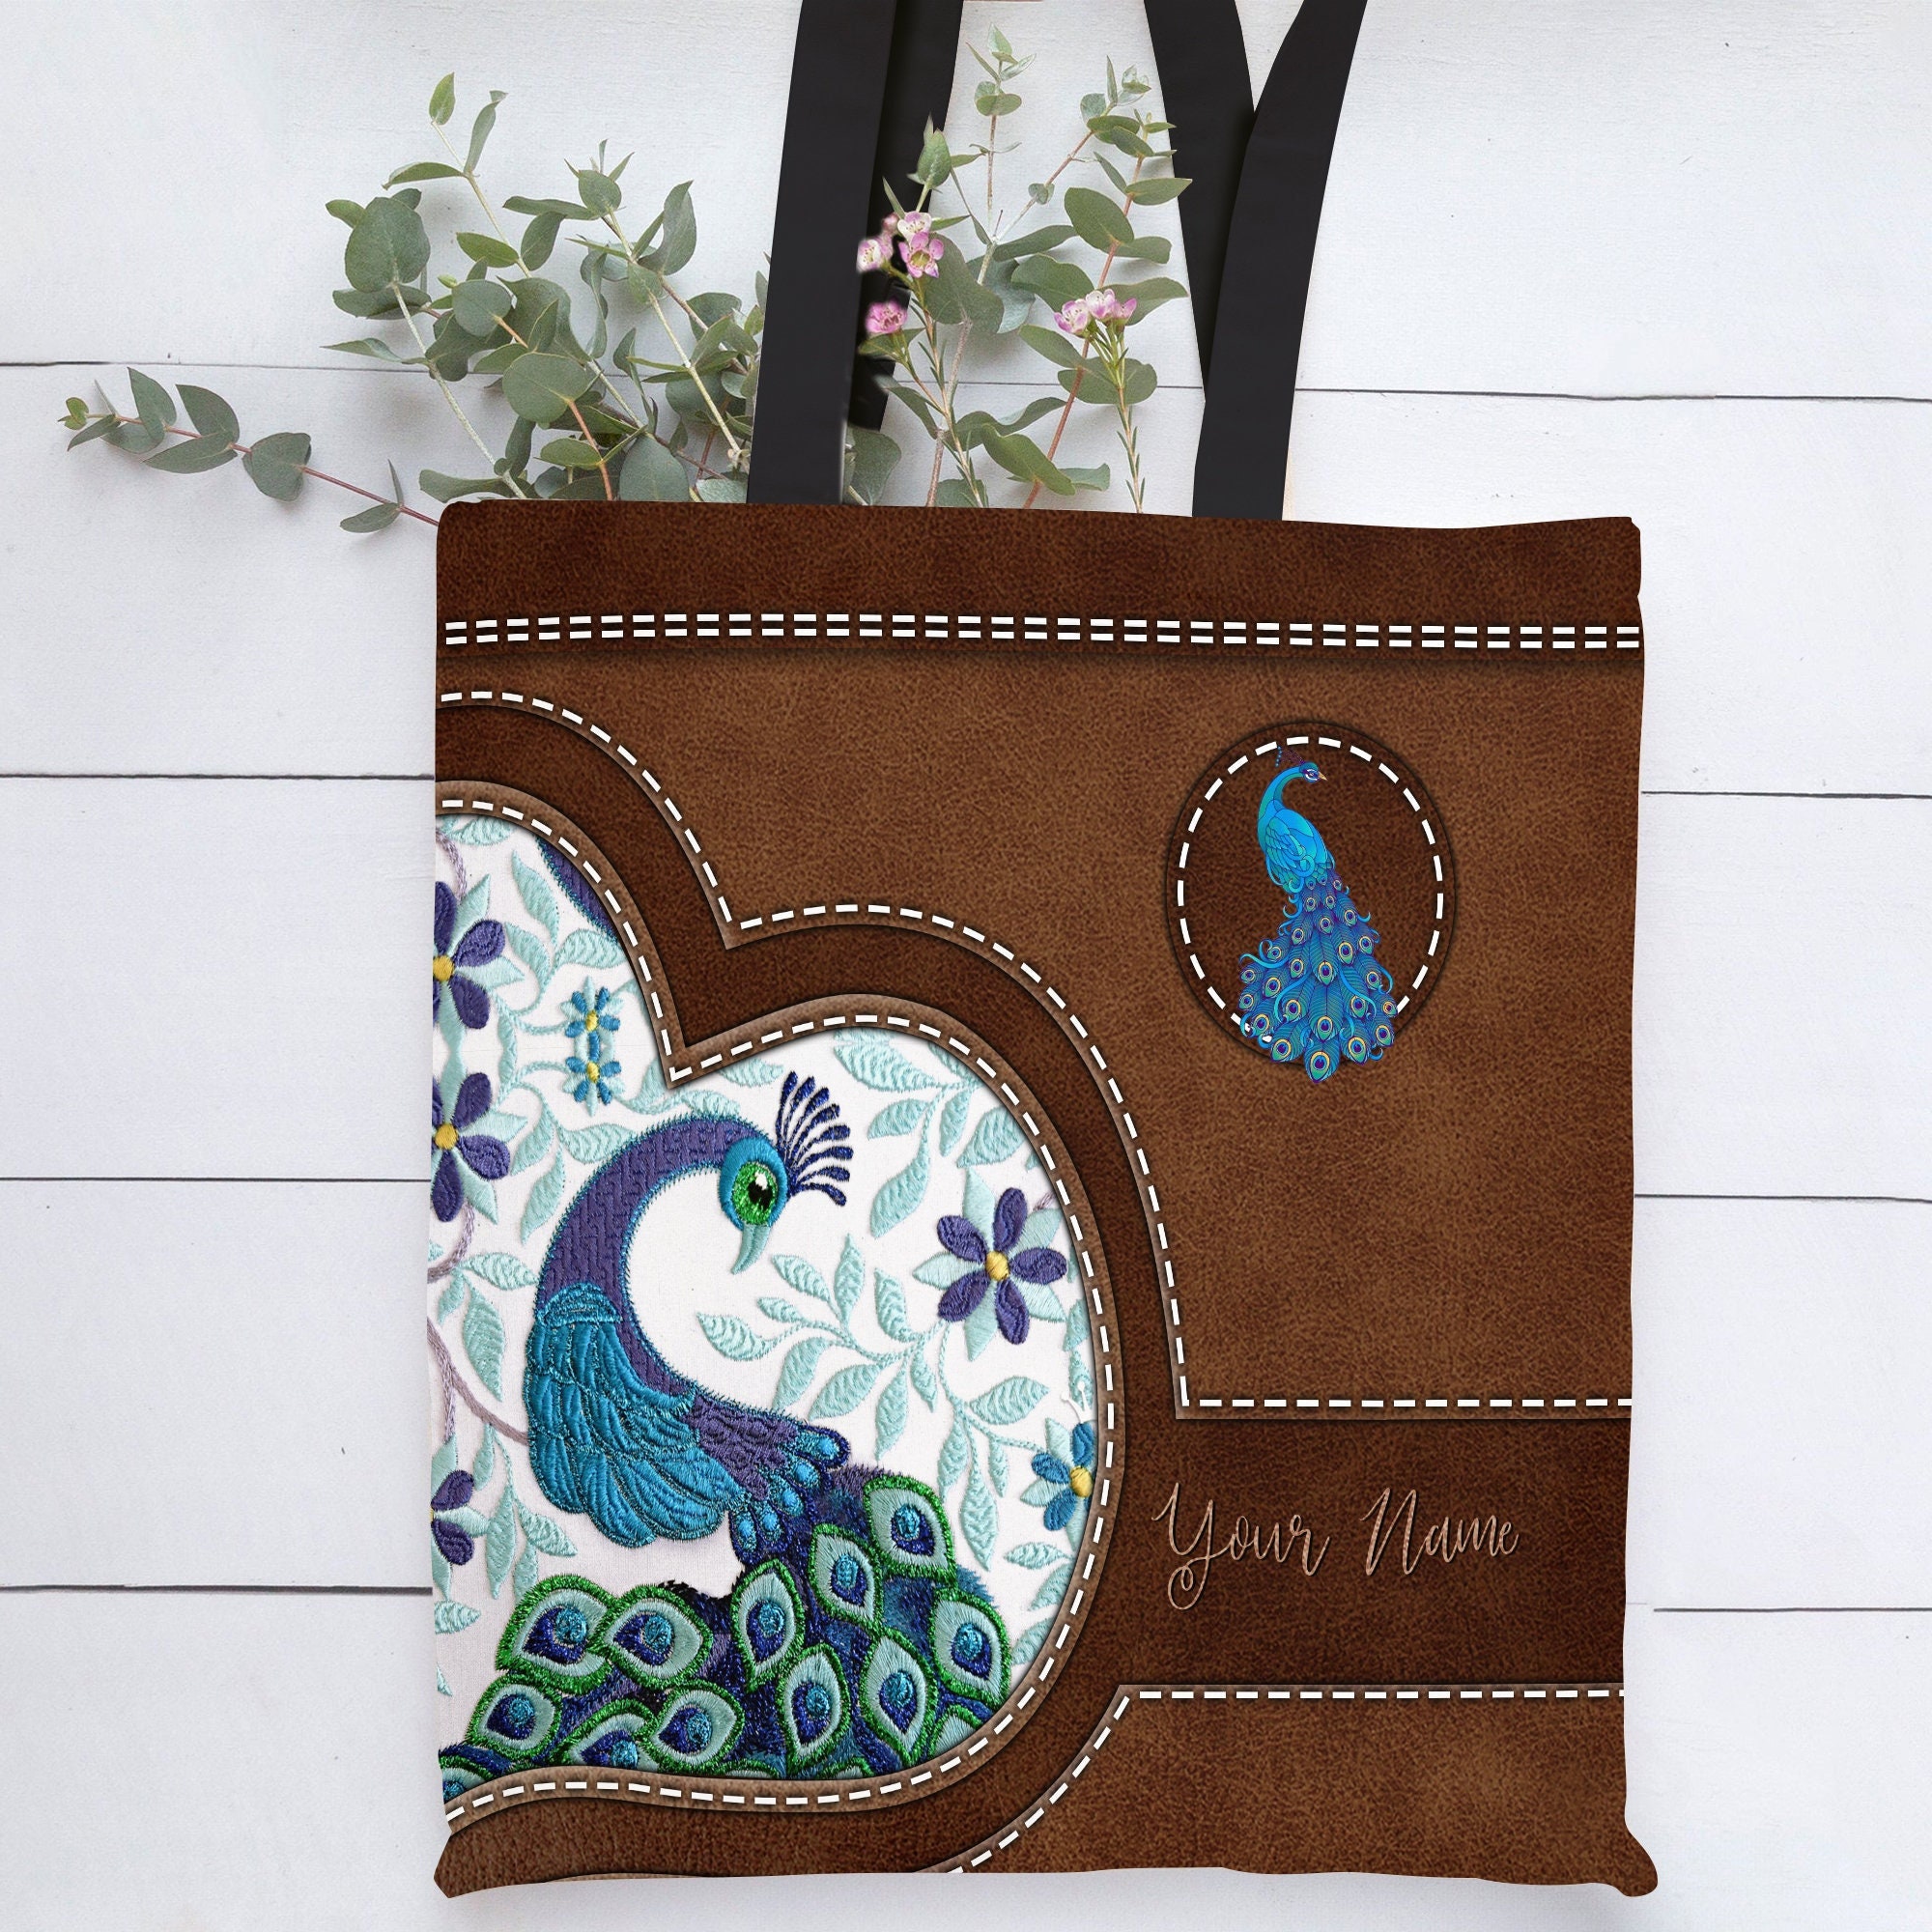 Custom Made Peacock Leather Purse - Hand Painted Purse- Peacock Small Bag -  Colorful Bag by PONKO WORLD